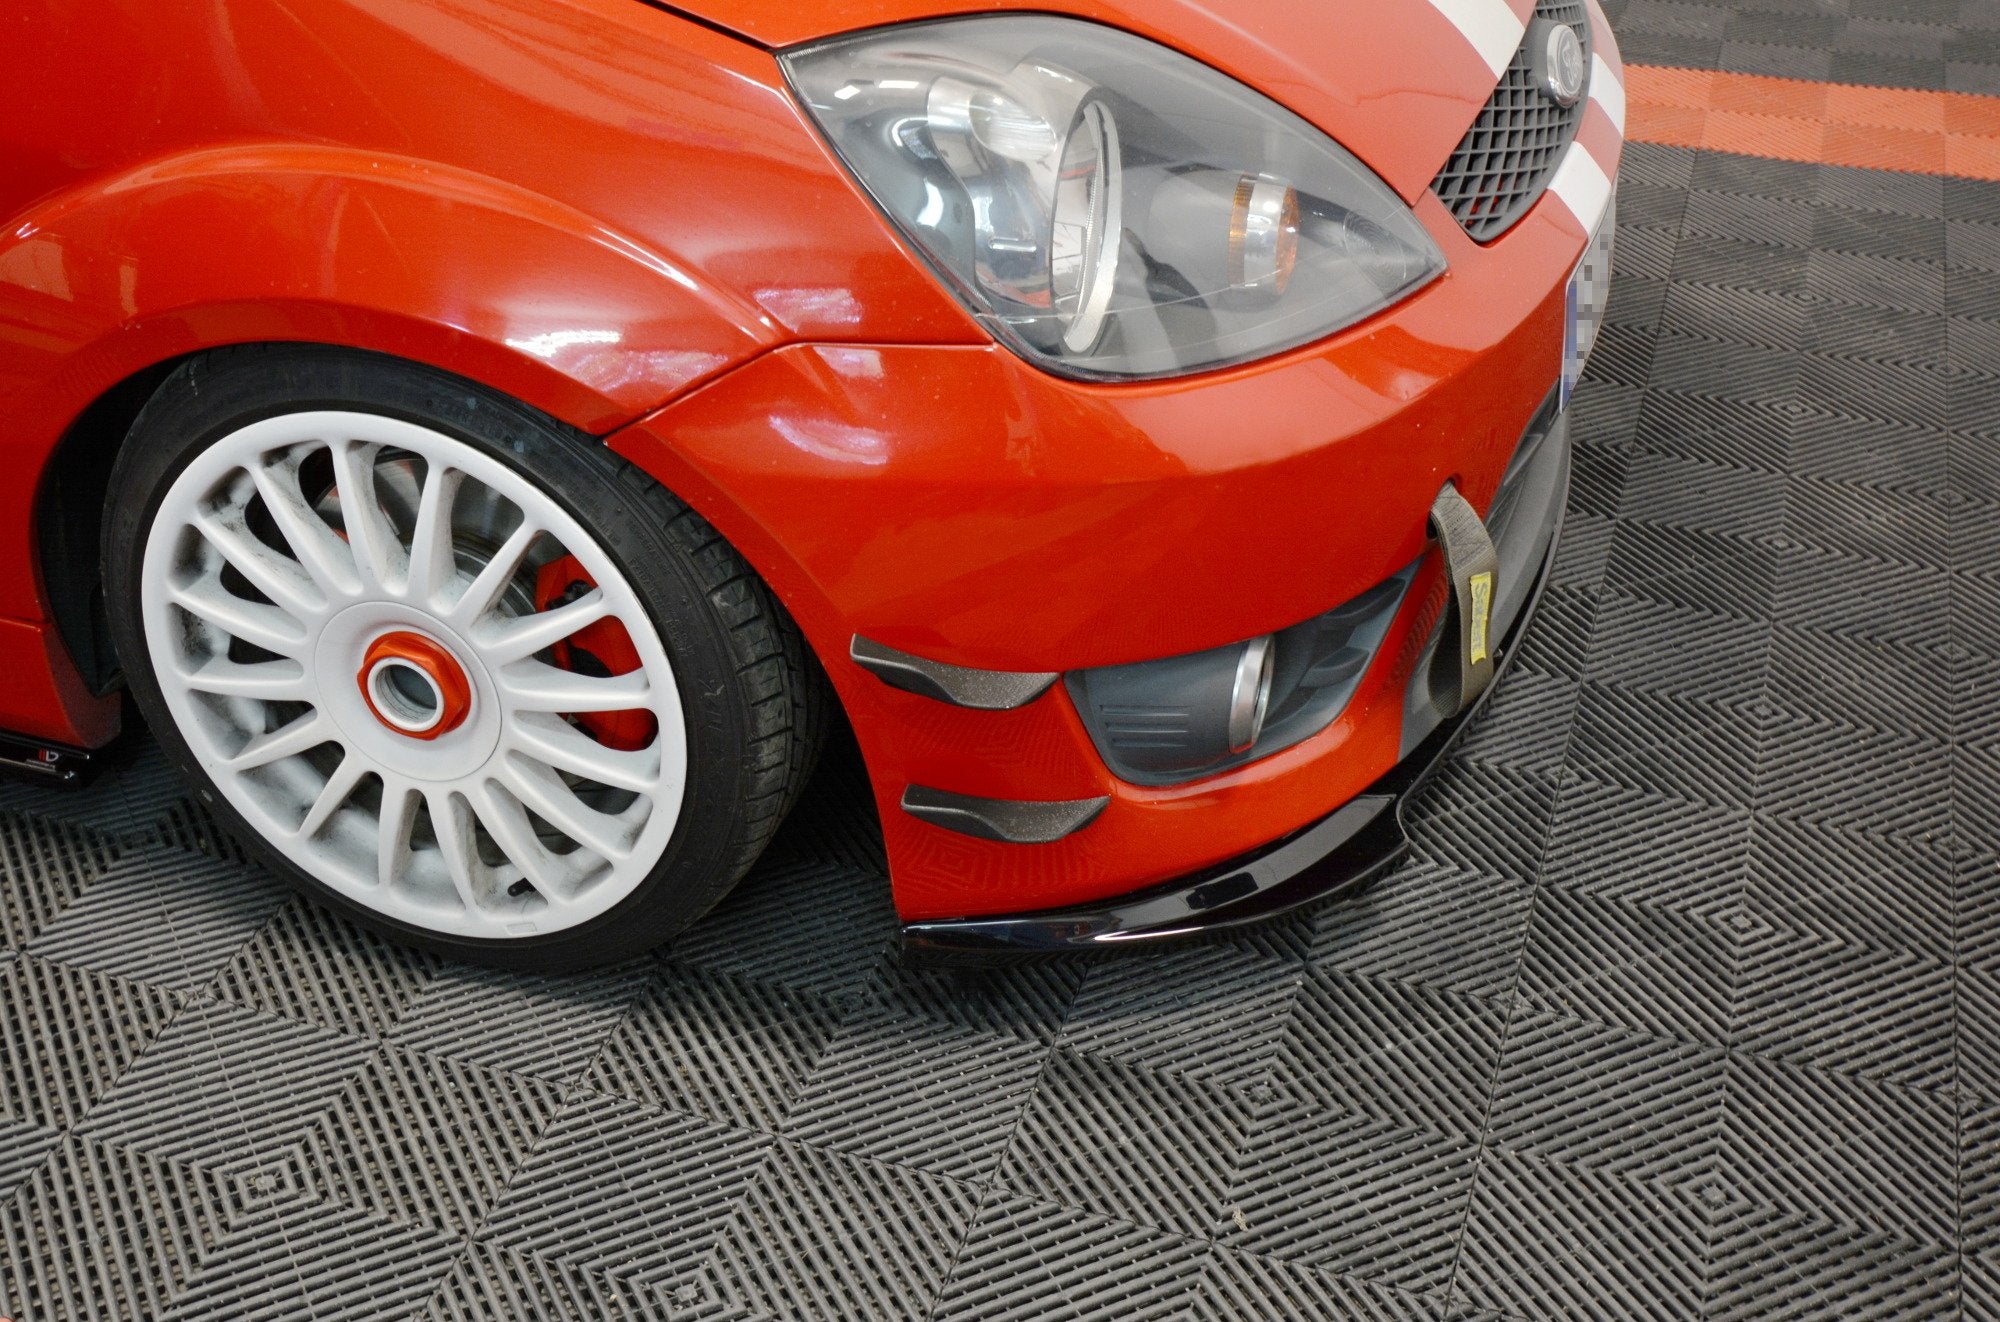 Front Bumper Wings (Canards) Ford Fiesta ST Mk6